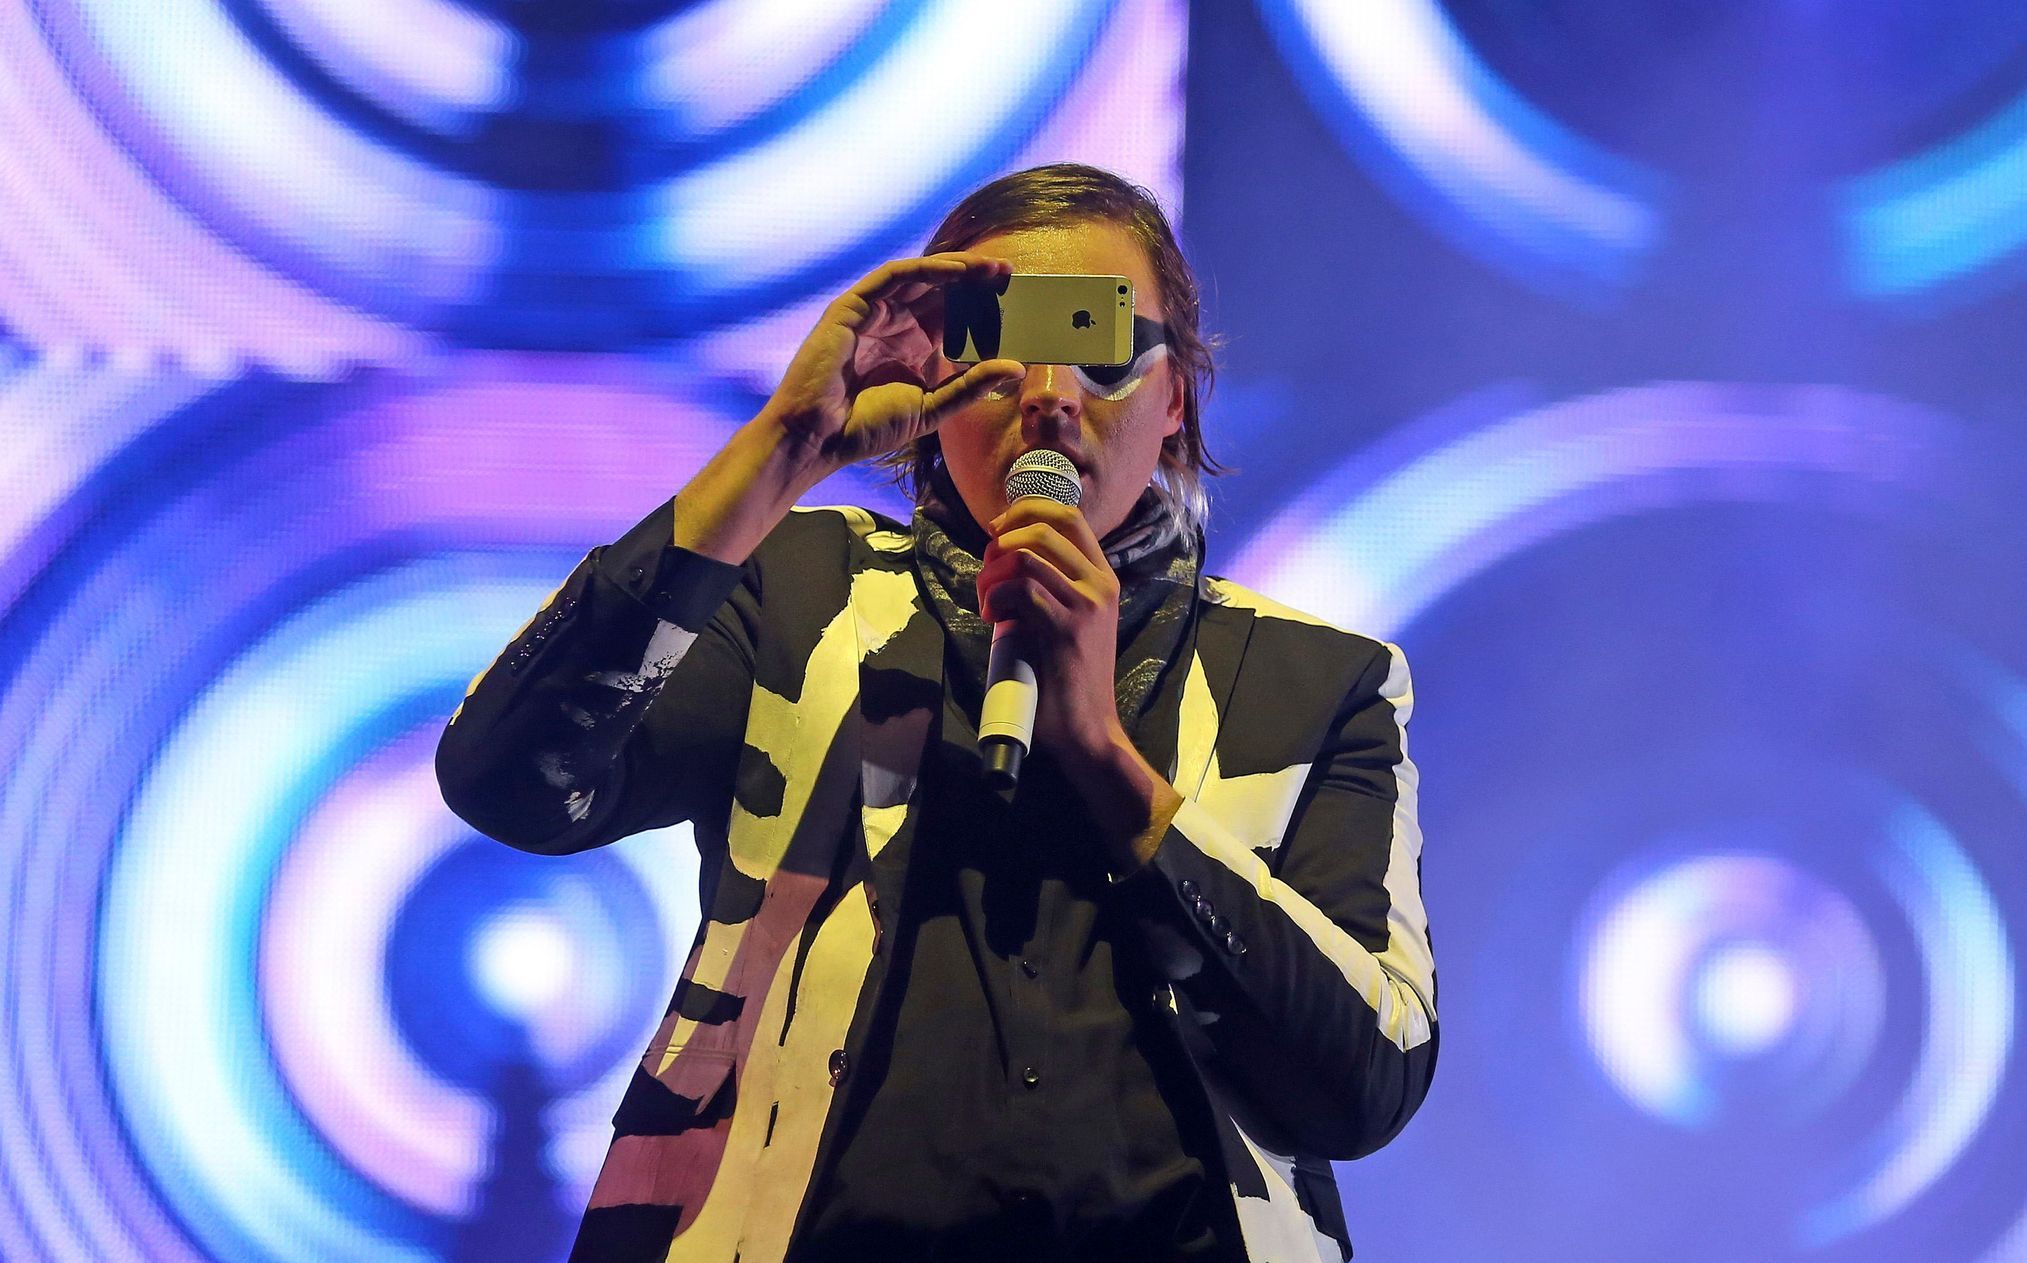 Win Butler, the lead singer of Arcade Fire, performs on the Pyramid Stage at Worthy Farm in Somerset, during the Glastonbury Festival